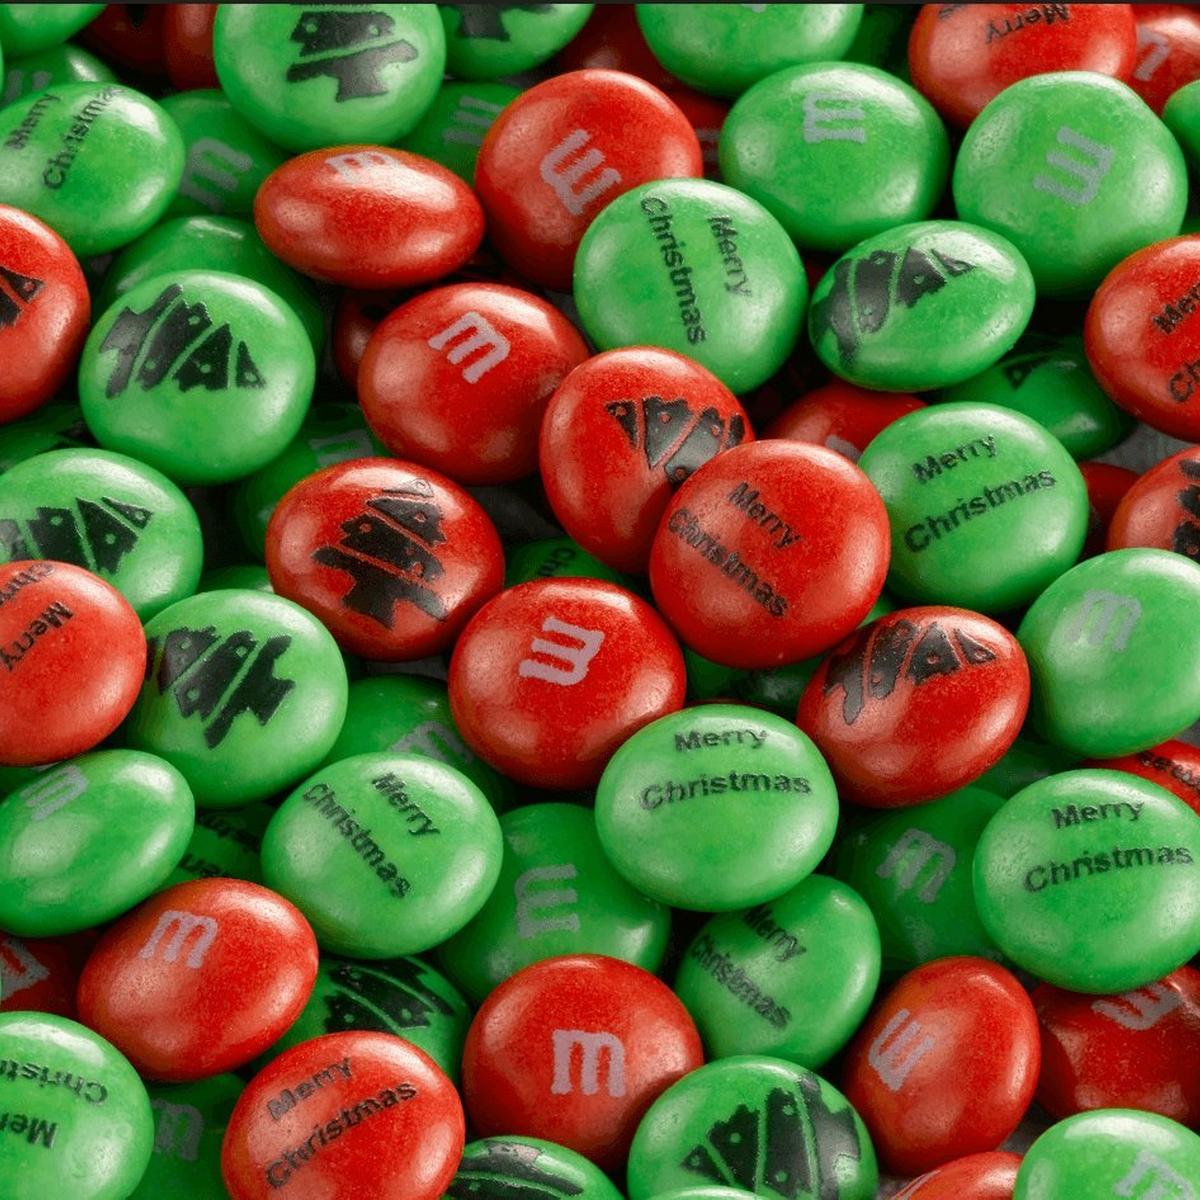 Personalized M&m's Bags -  Norway